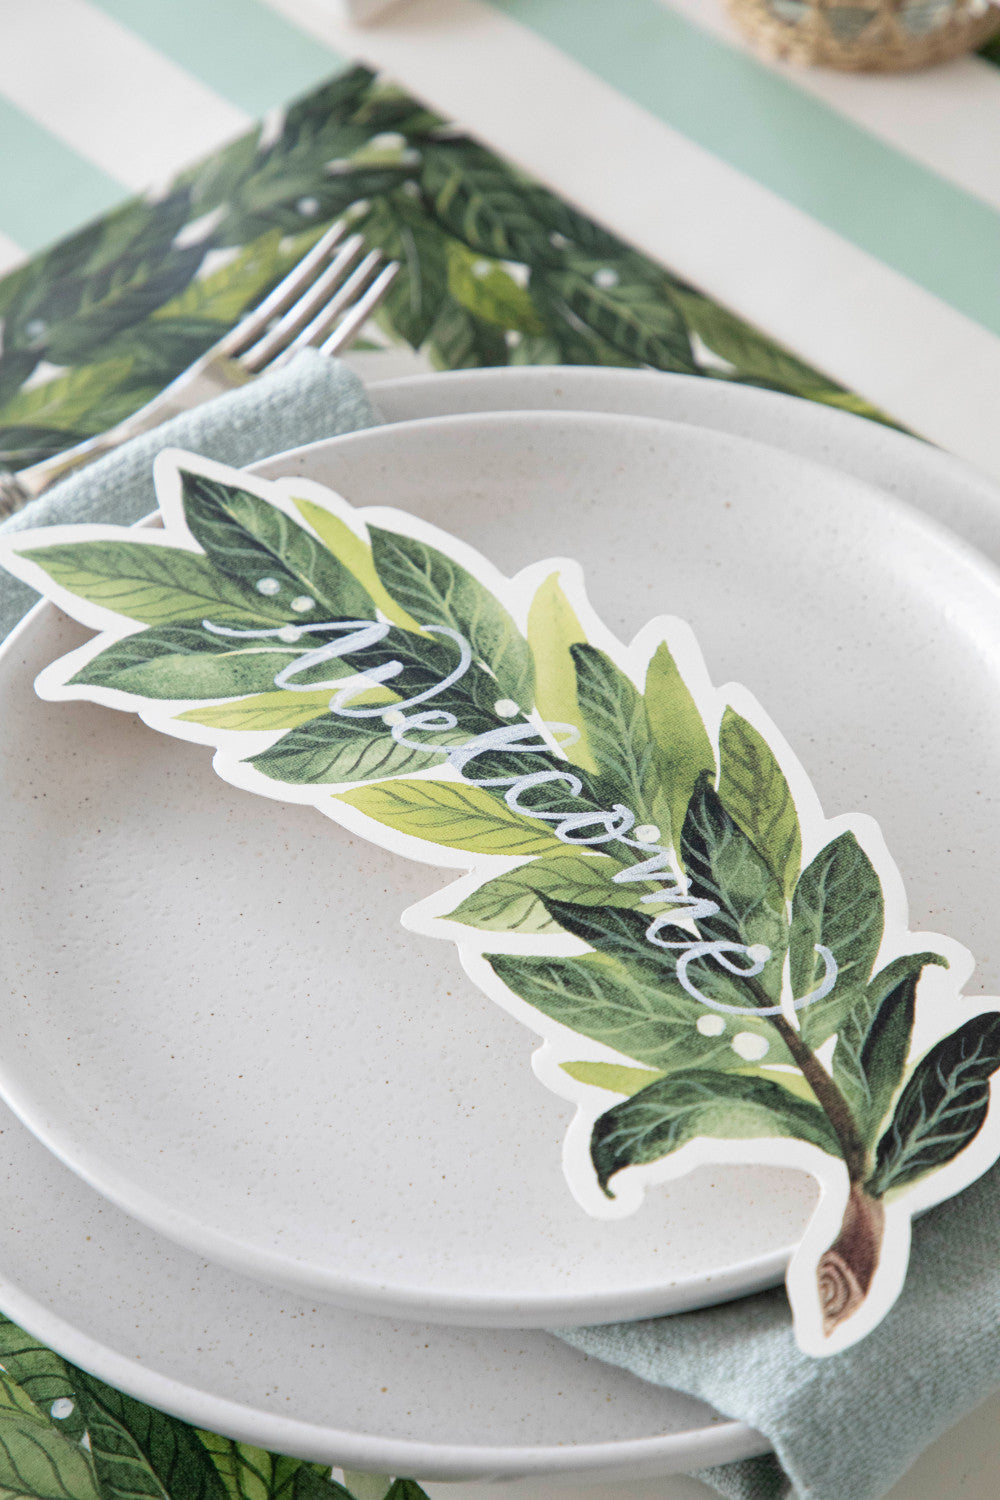 An elegant place setting featuring a Laurel Table Accent with &quot;Welcome&quot; written on it in white ink resting on the plate.